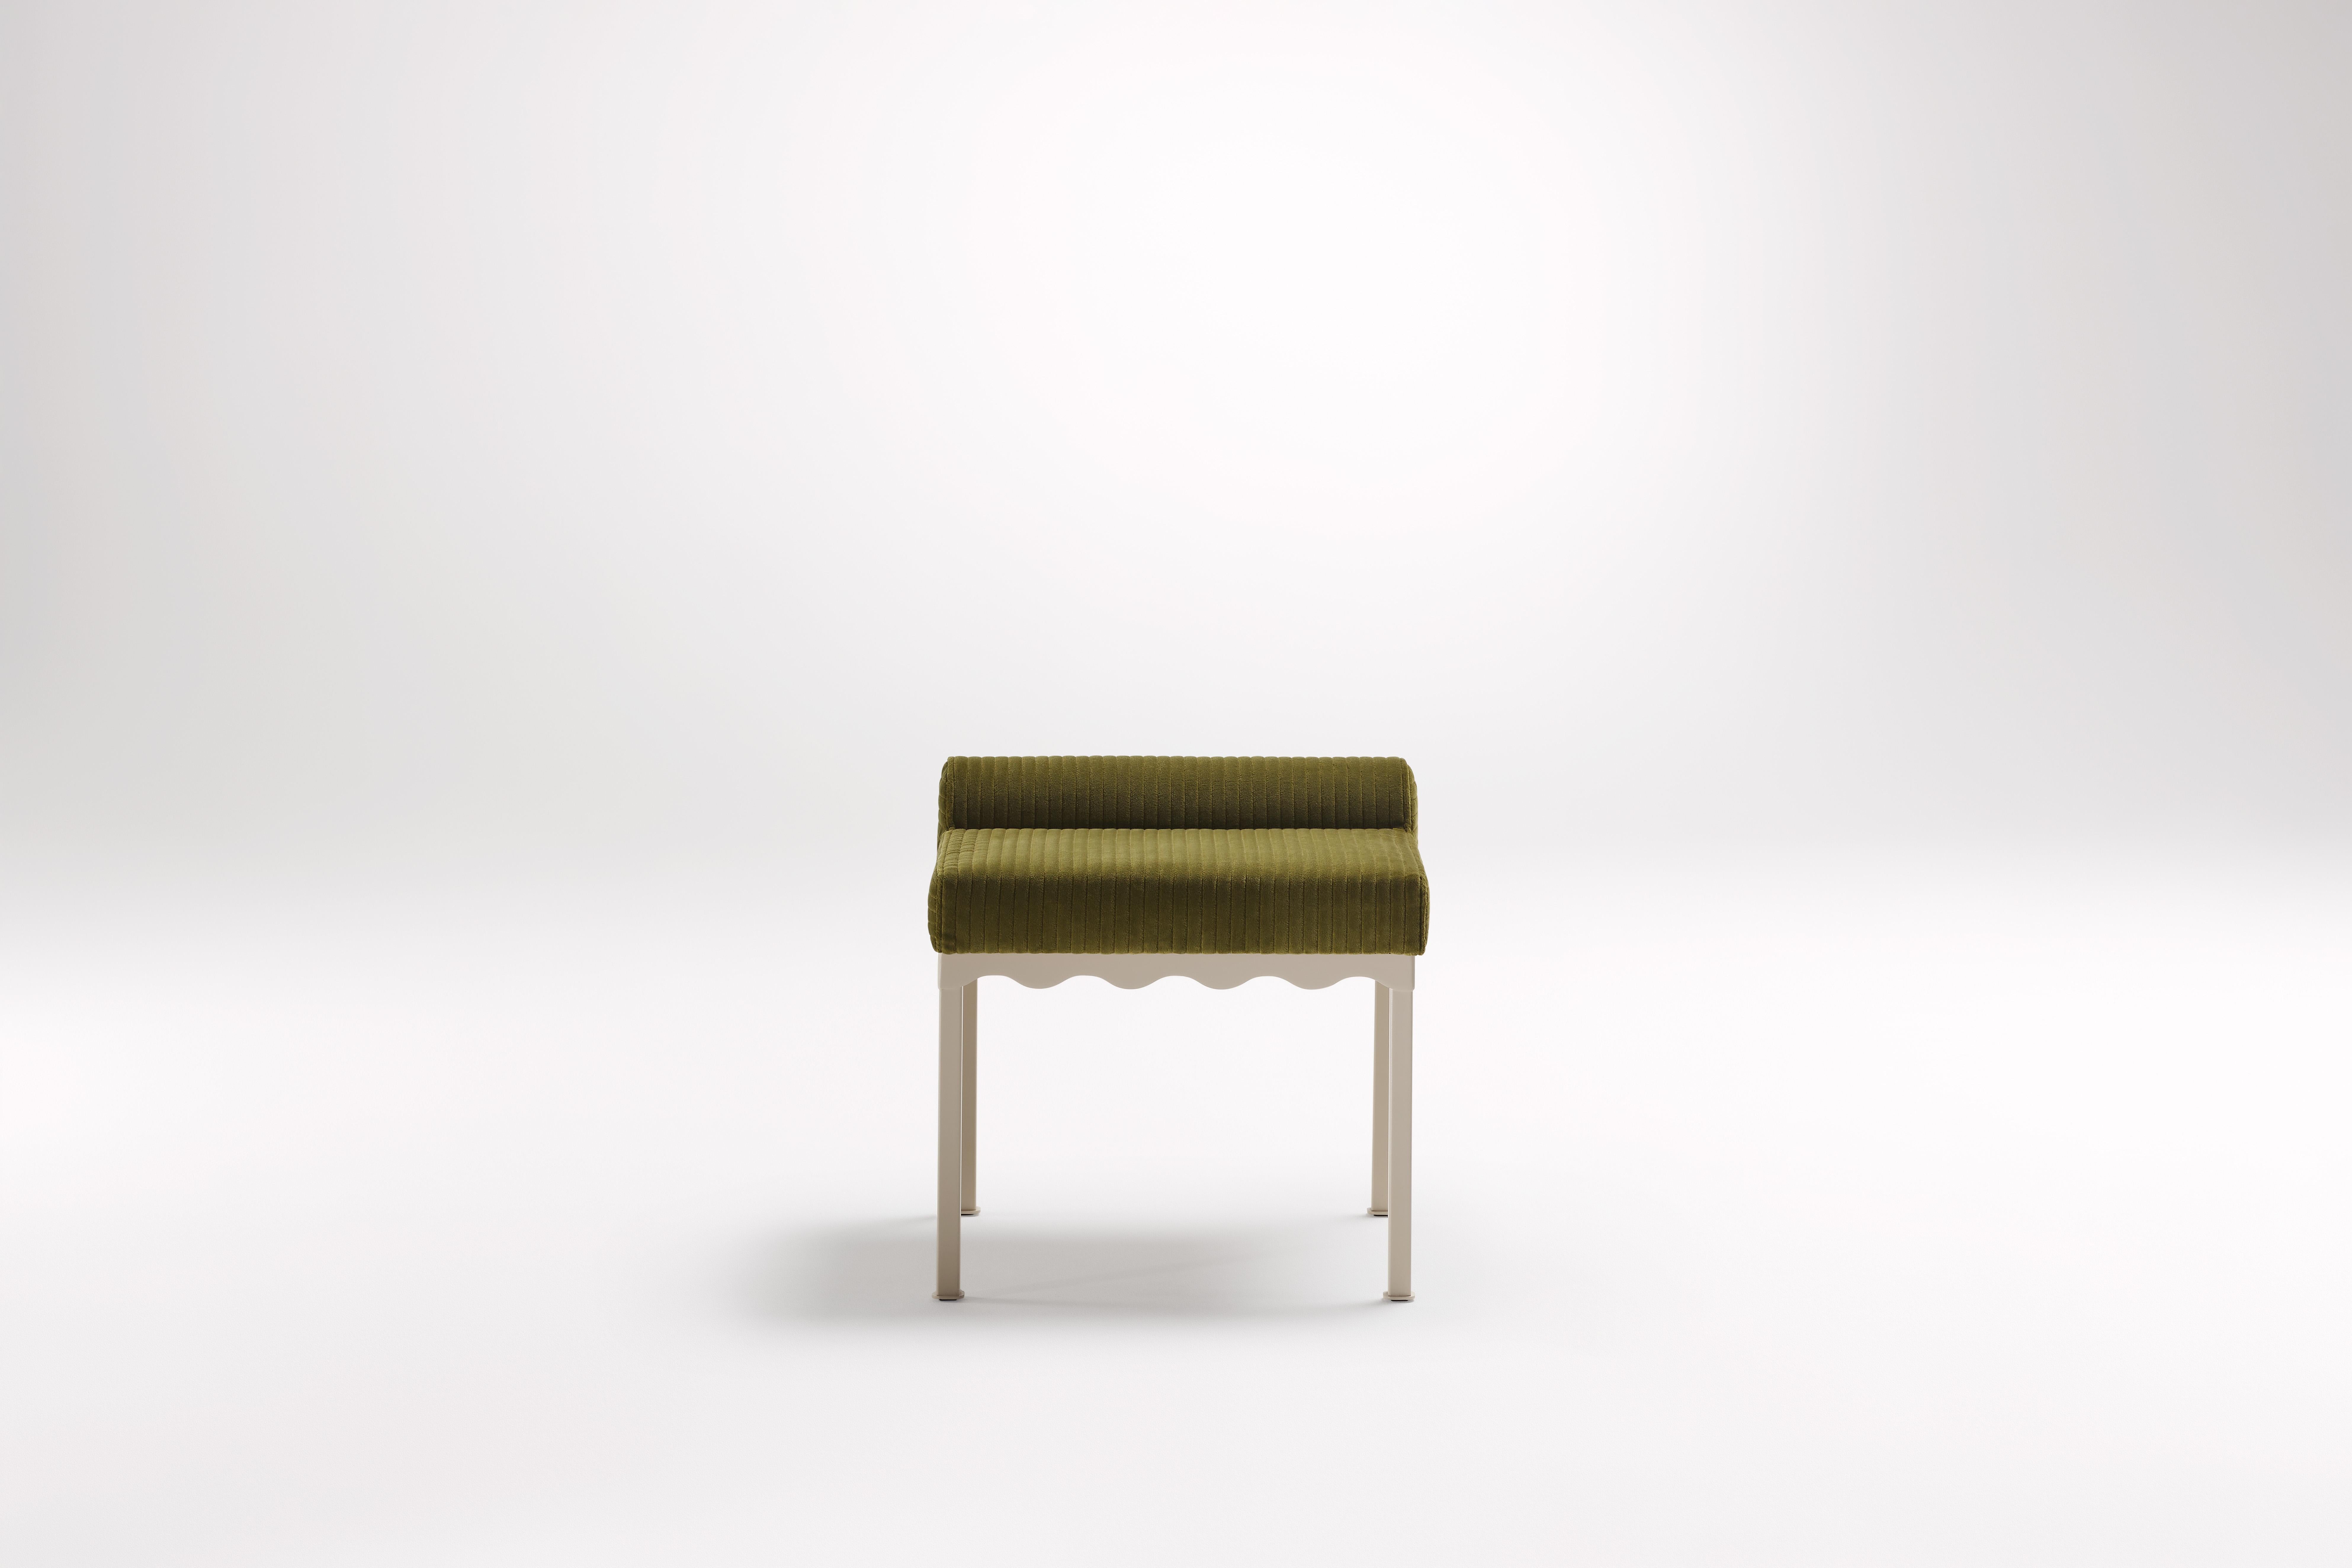 Oleander Bellini 540 Bench by Coco Flip
Dimensions: D 54 x W 54 x H 52.5 cm
Materials: Timber / Upholstered tops, Powder-coated steel frame. 
Weight: 12 kg
Frame Finishes: Textura Paperbark.

Coco Flip is a Melbourne based furniture and lighting